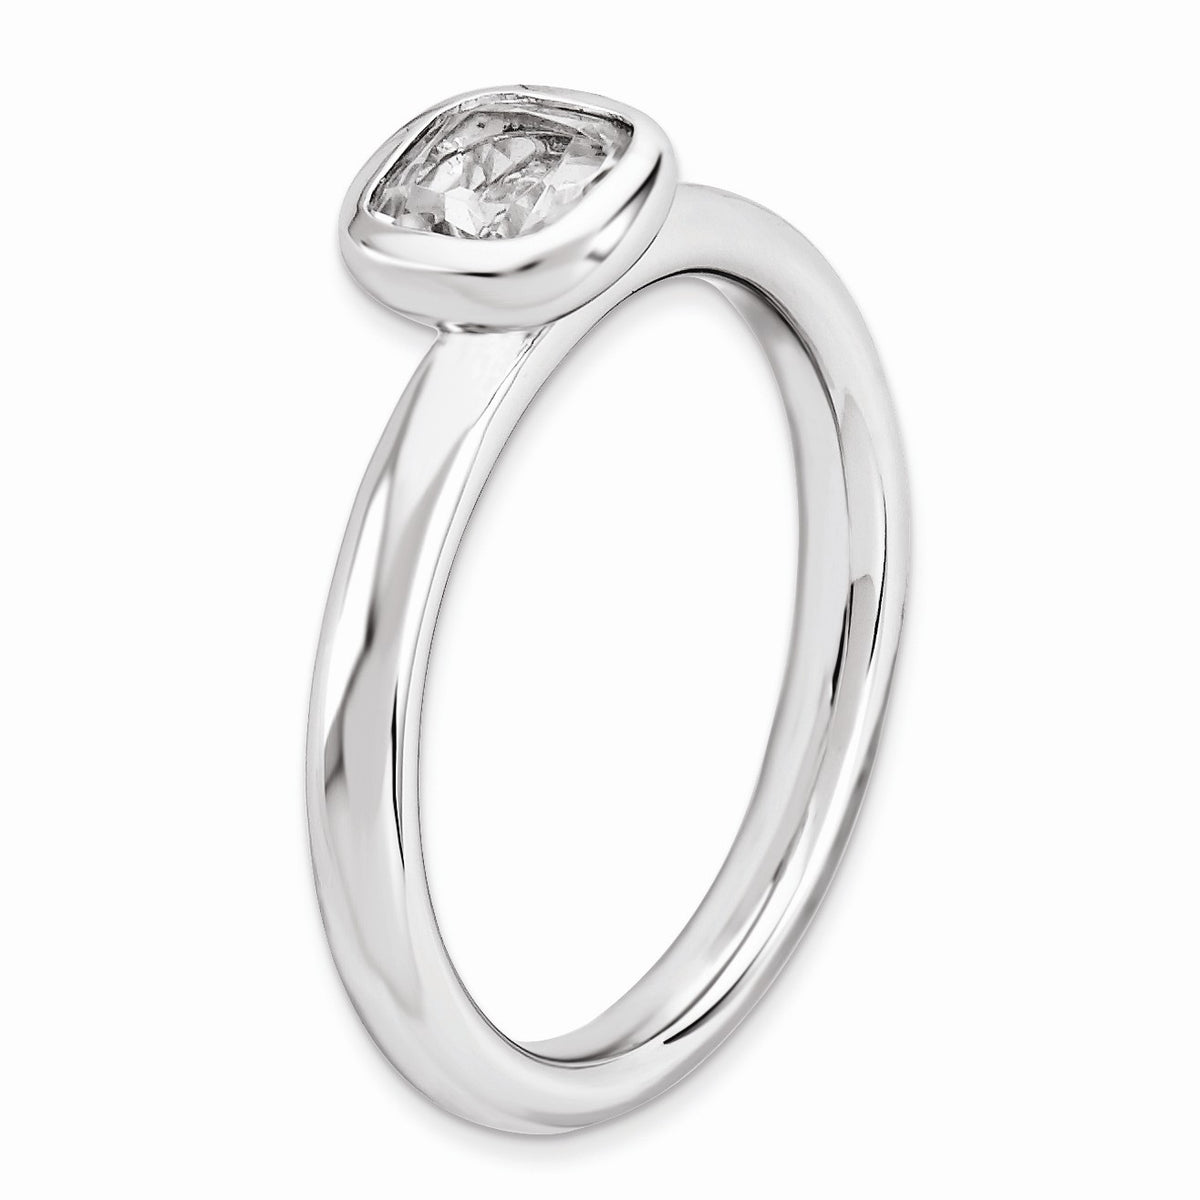 Alternate view of the Silver Stackable Cushion Cut White Topaz Solitaire Ring by The Black Bow Jewelry Co.